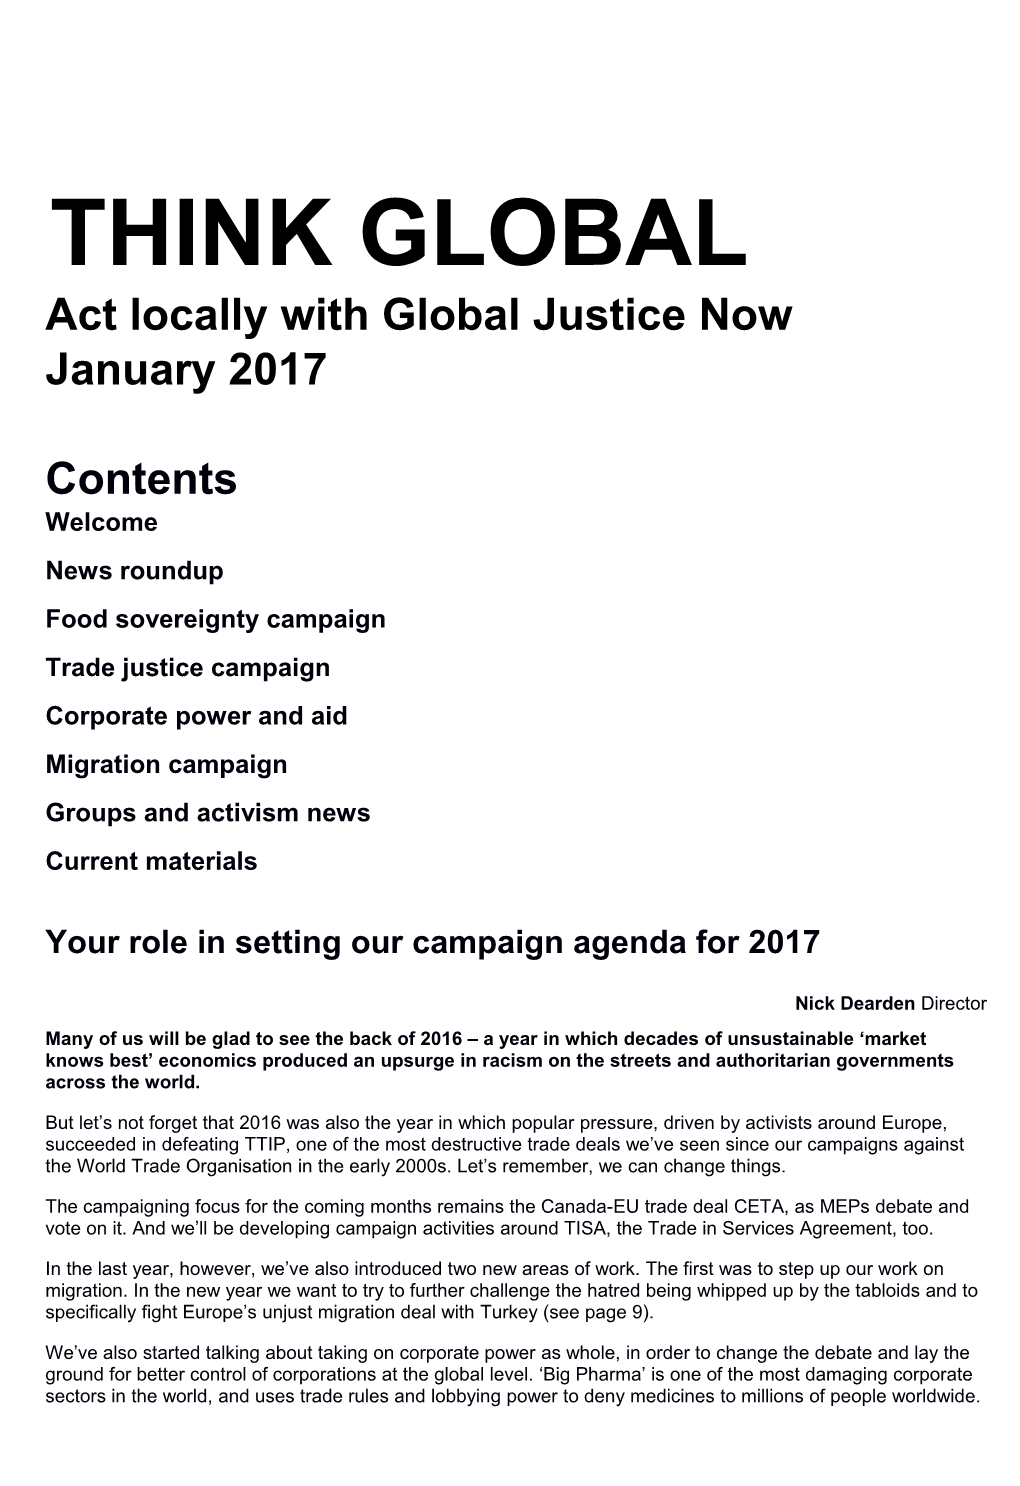 Act Locally with Global Justice Now s2